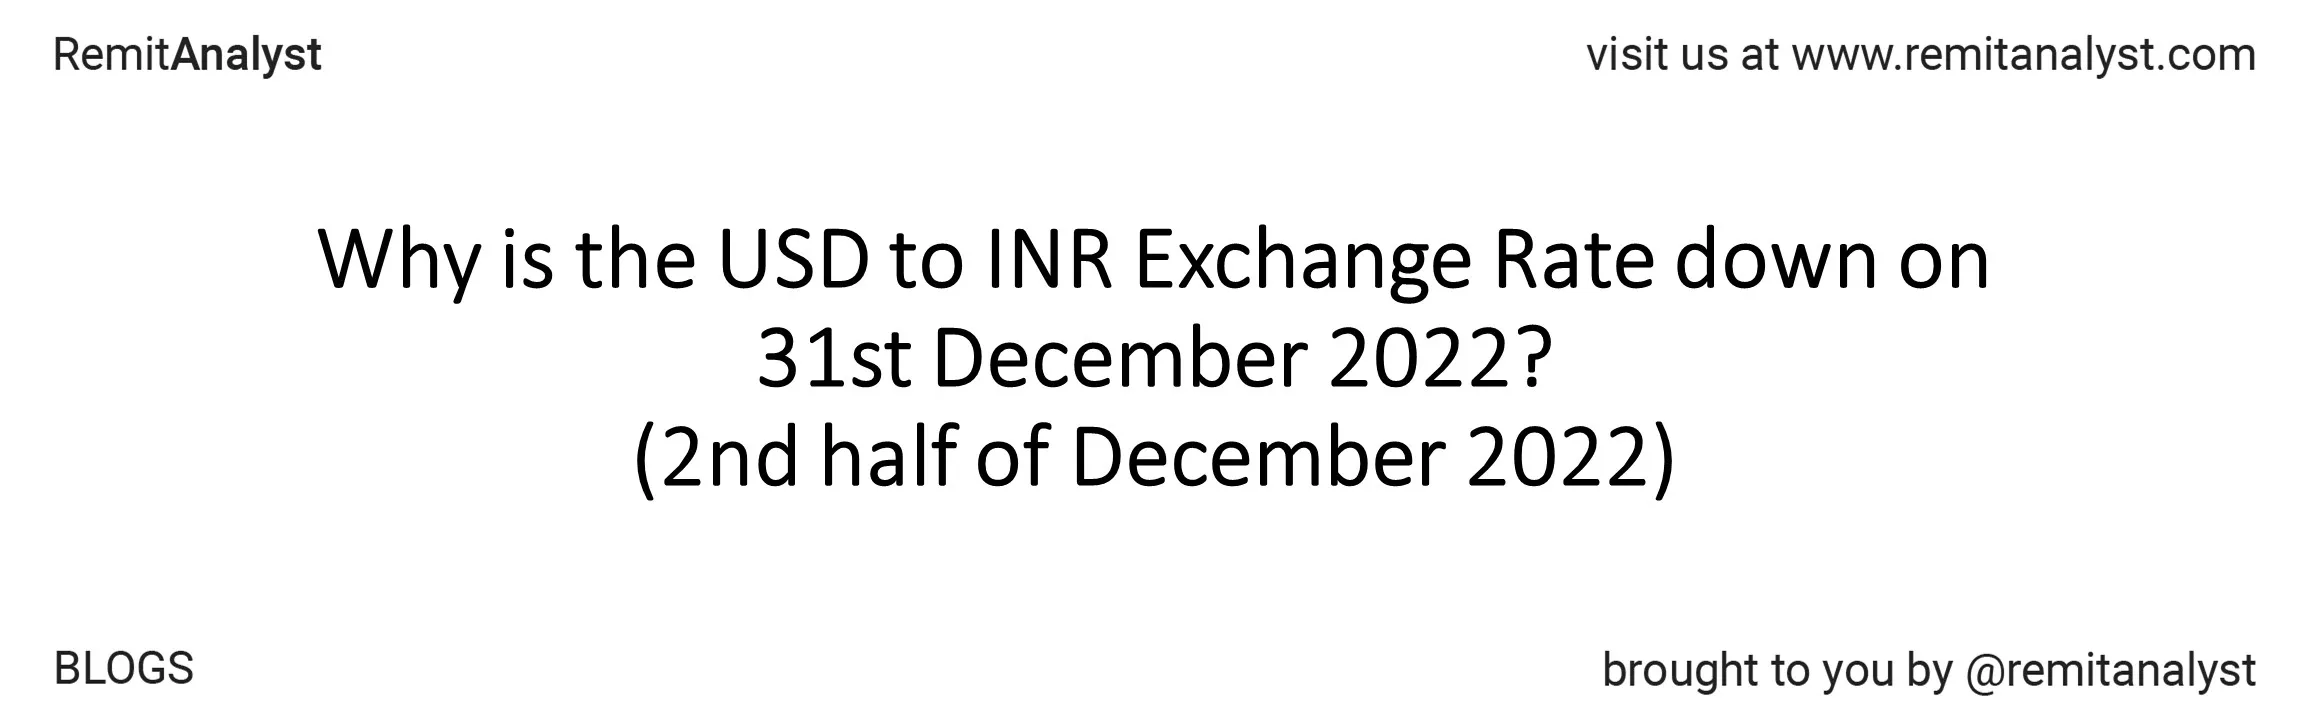 usd-to-inr-exchange-rate-16-dec-2022-to-31-dec-2022-title